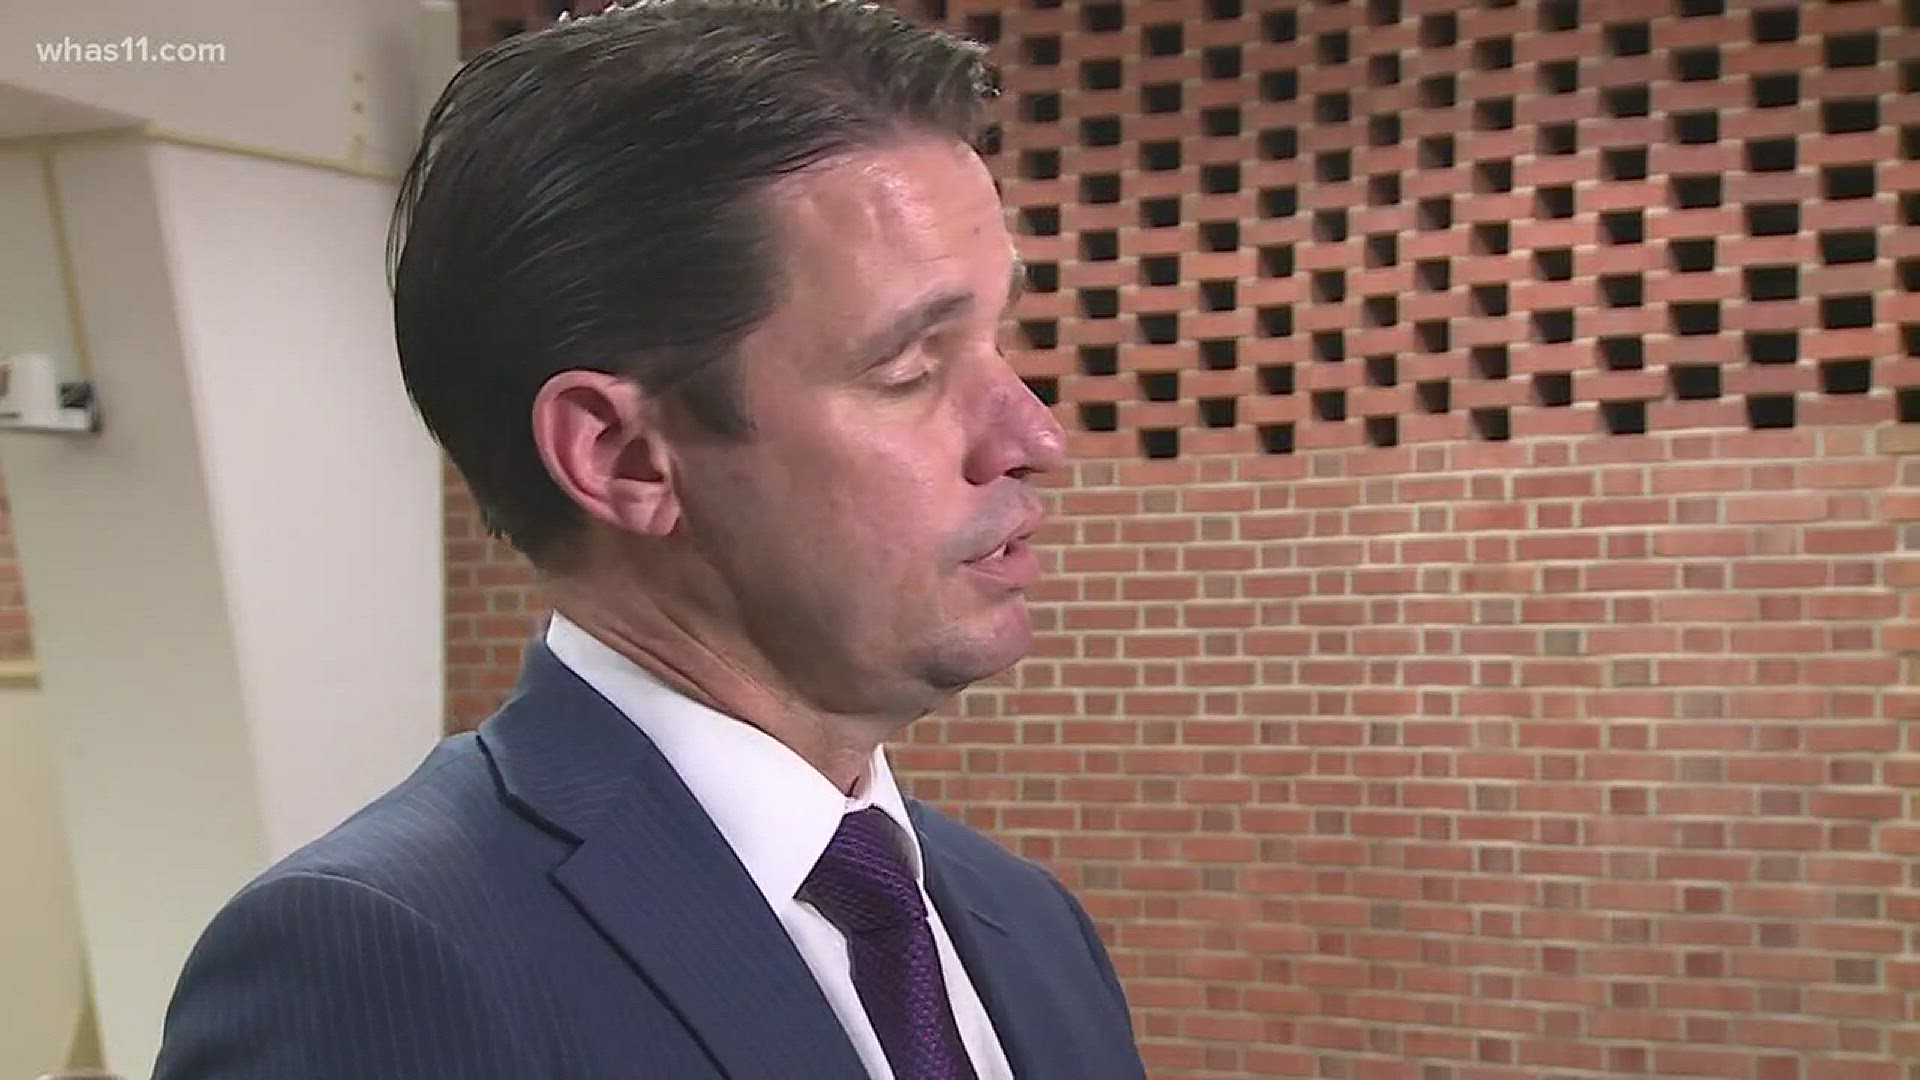 After nearly 8 months on the job, Dr. Marty Pollio went from acting to the permanent superintendent of Jefferson County Public Schools.